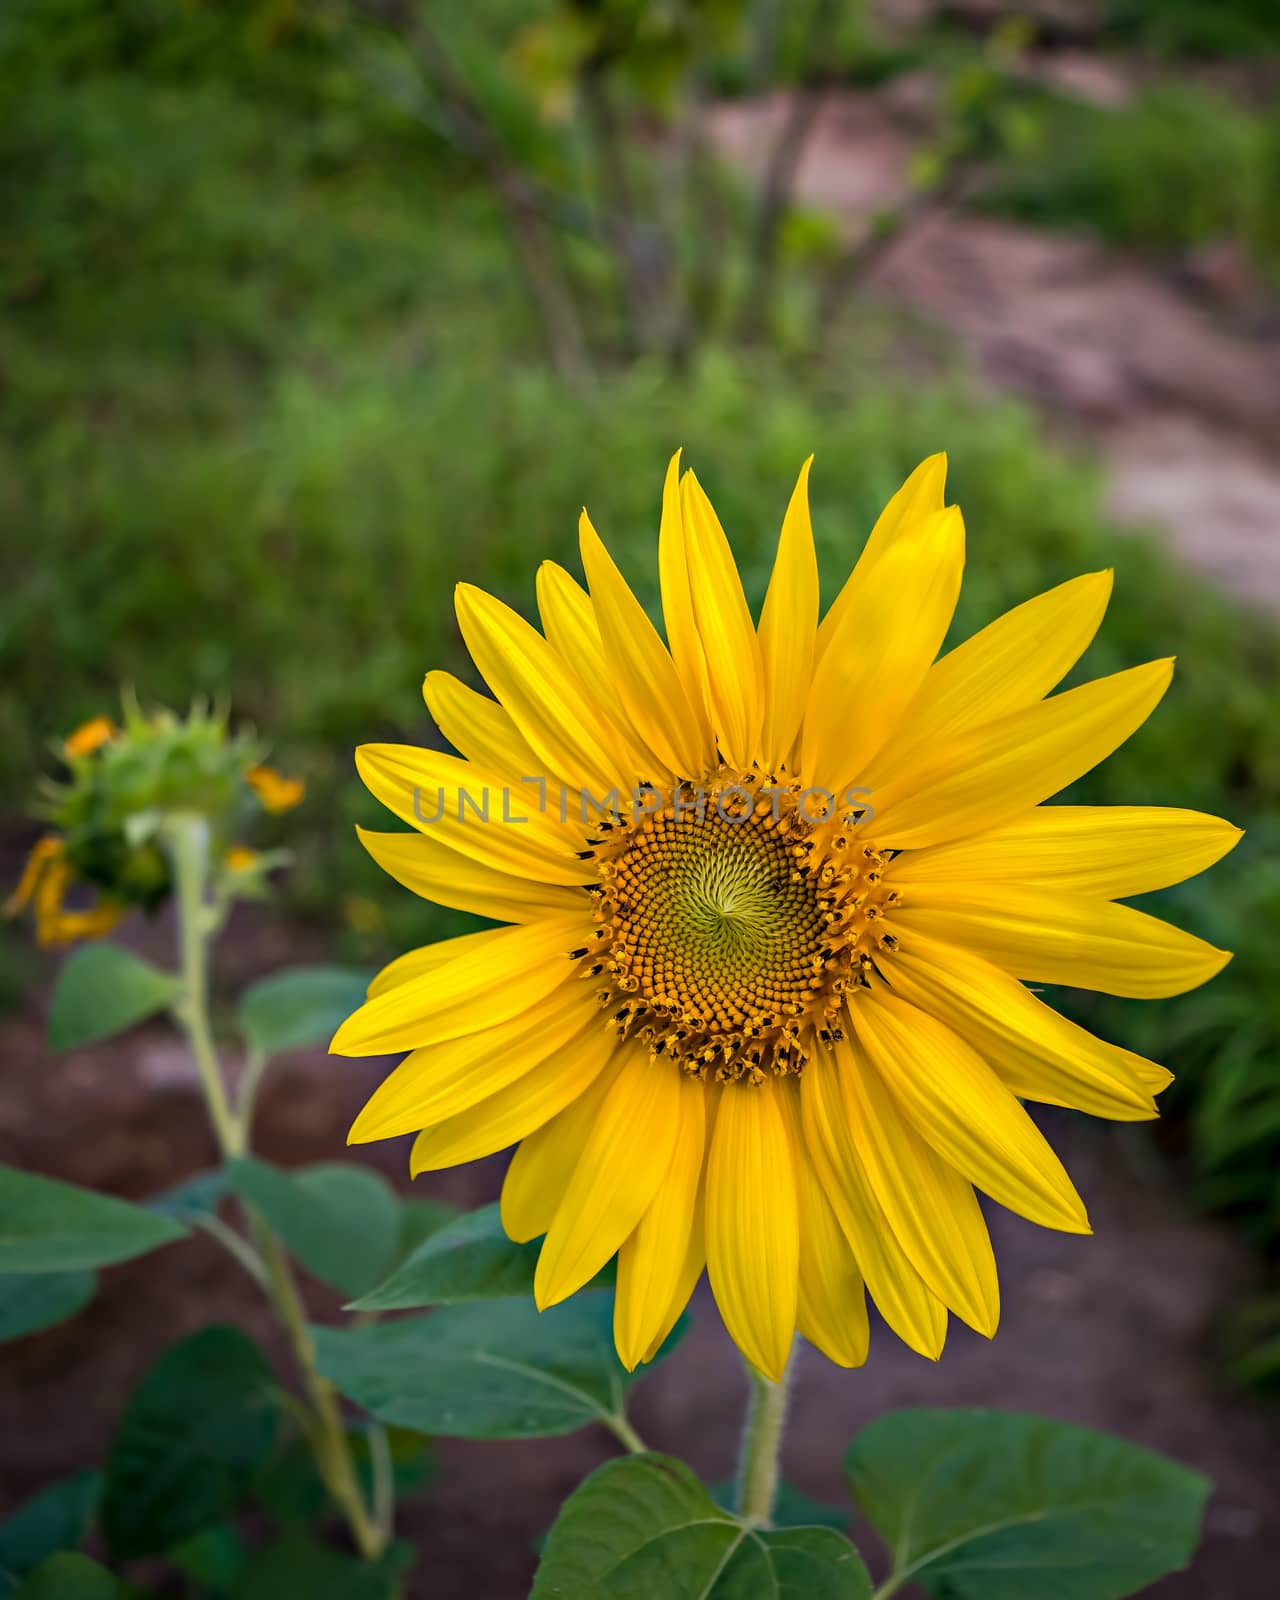 Close up, isolated  photograph of a Sunflower shinning in the evening sunlight. The scientific name is Helianthus.